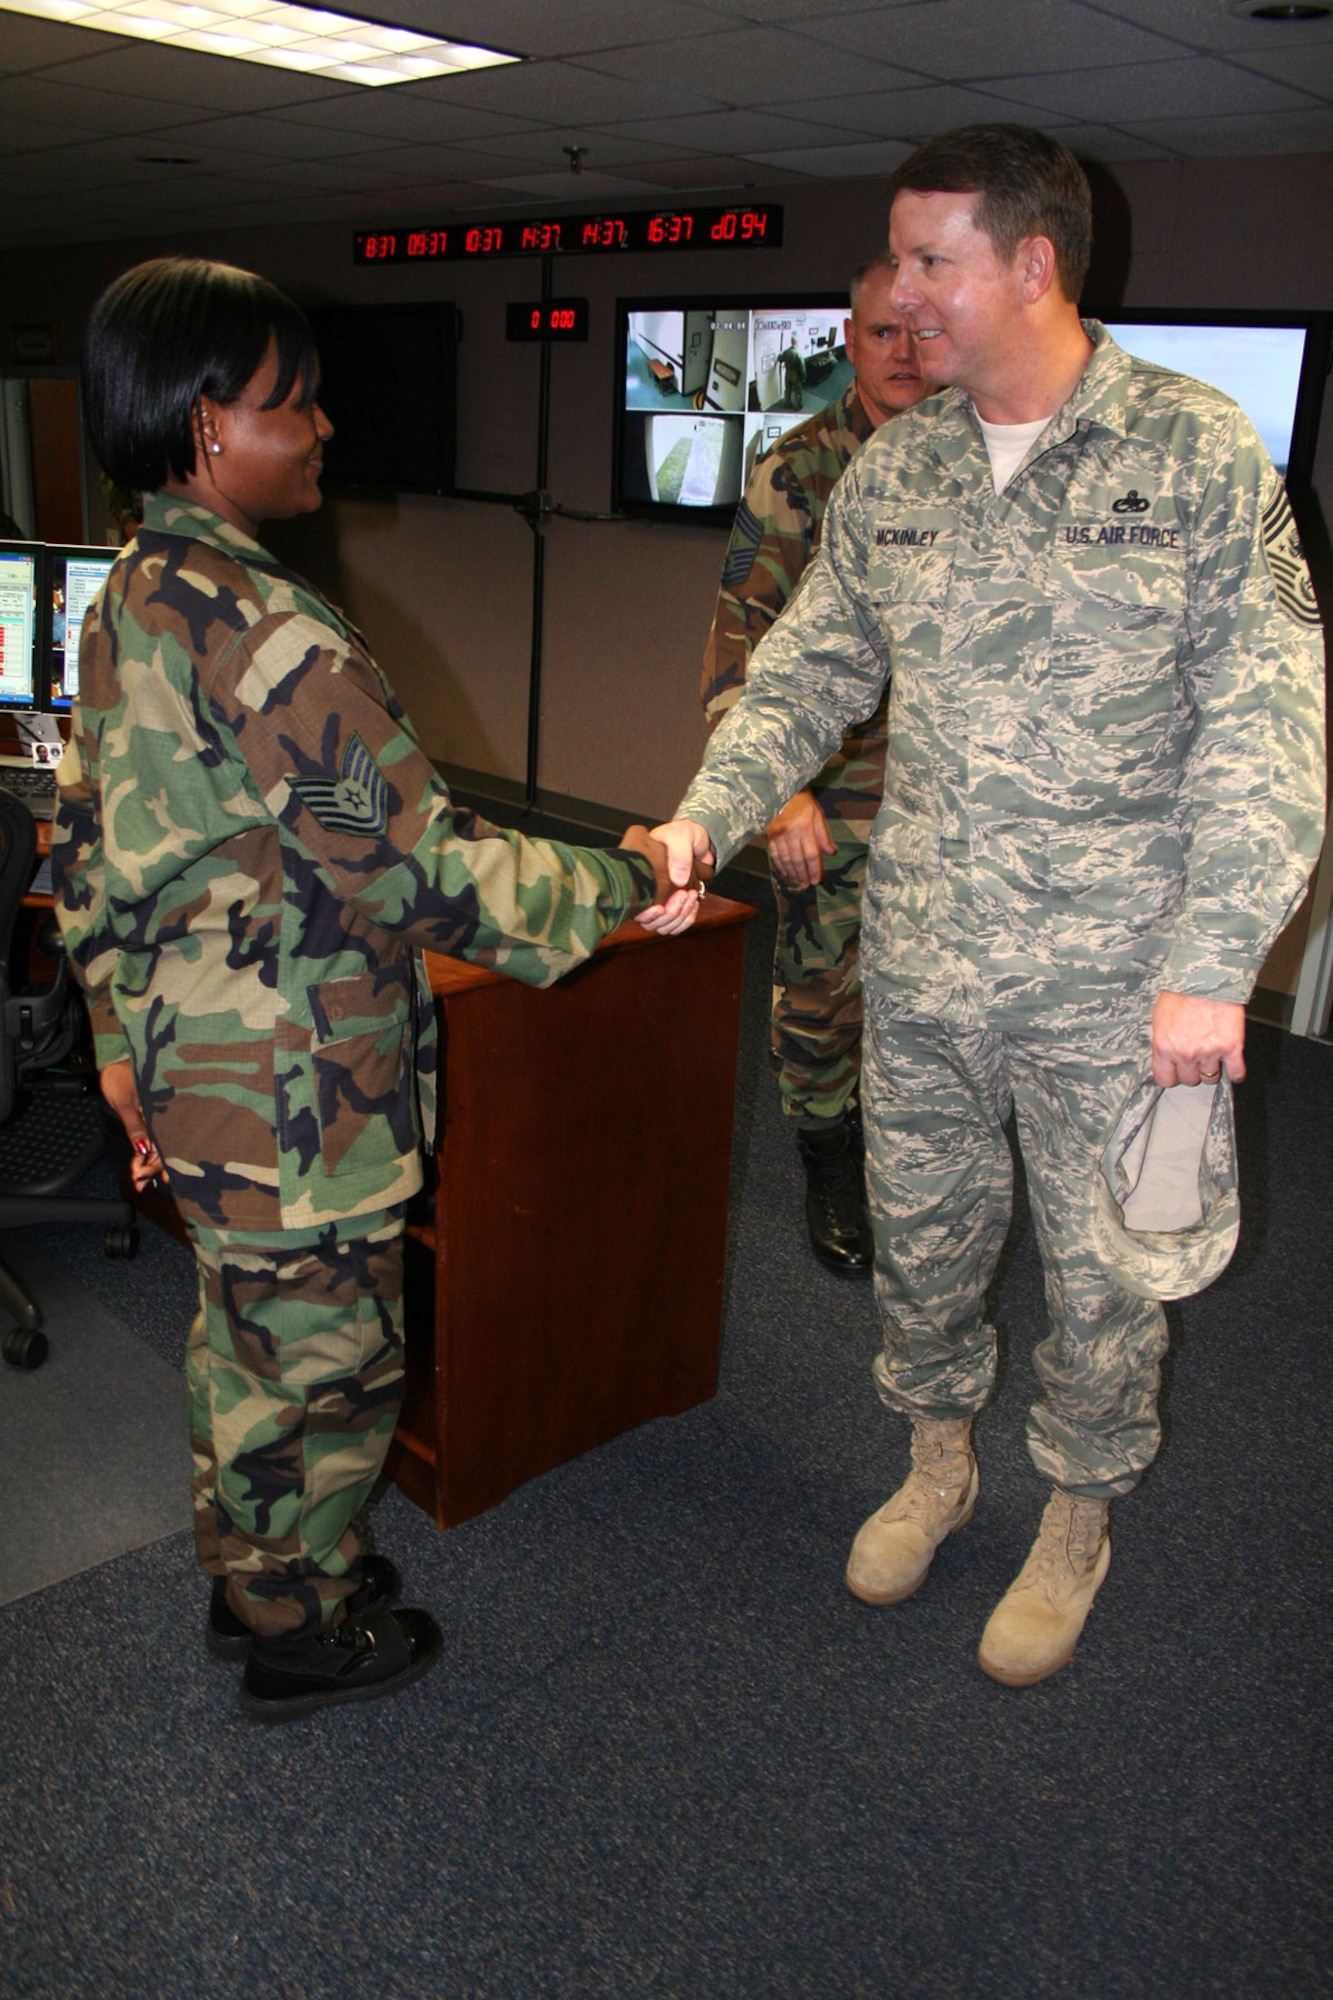 Chief Master Sgt. of the Air Force Rodney J. McKinley shakes hands with Tech. Sgt. Ishasia Love-Murphy April 4 at Lajes Field, Azores. Chief McKinley kicked off his tour of U.S. Air Forces in Europe installations with a two-day visit to Lajes Field April 4 and 5. Sergeant Love-Murphy is a command post controller. (U.S. Air Force photo/Staff Sgt. Marcus McDonald) 